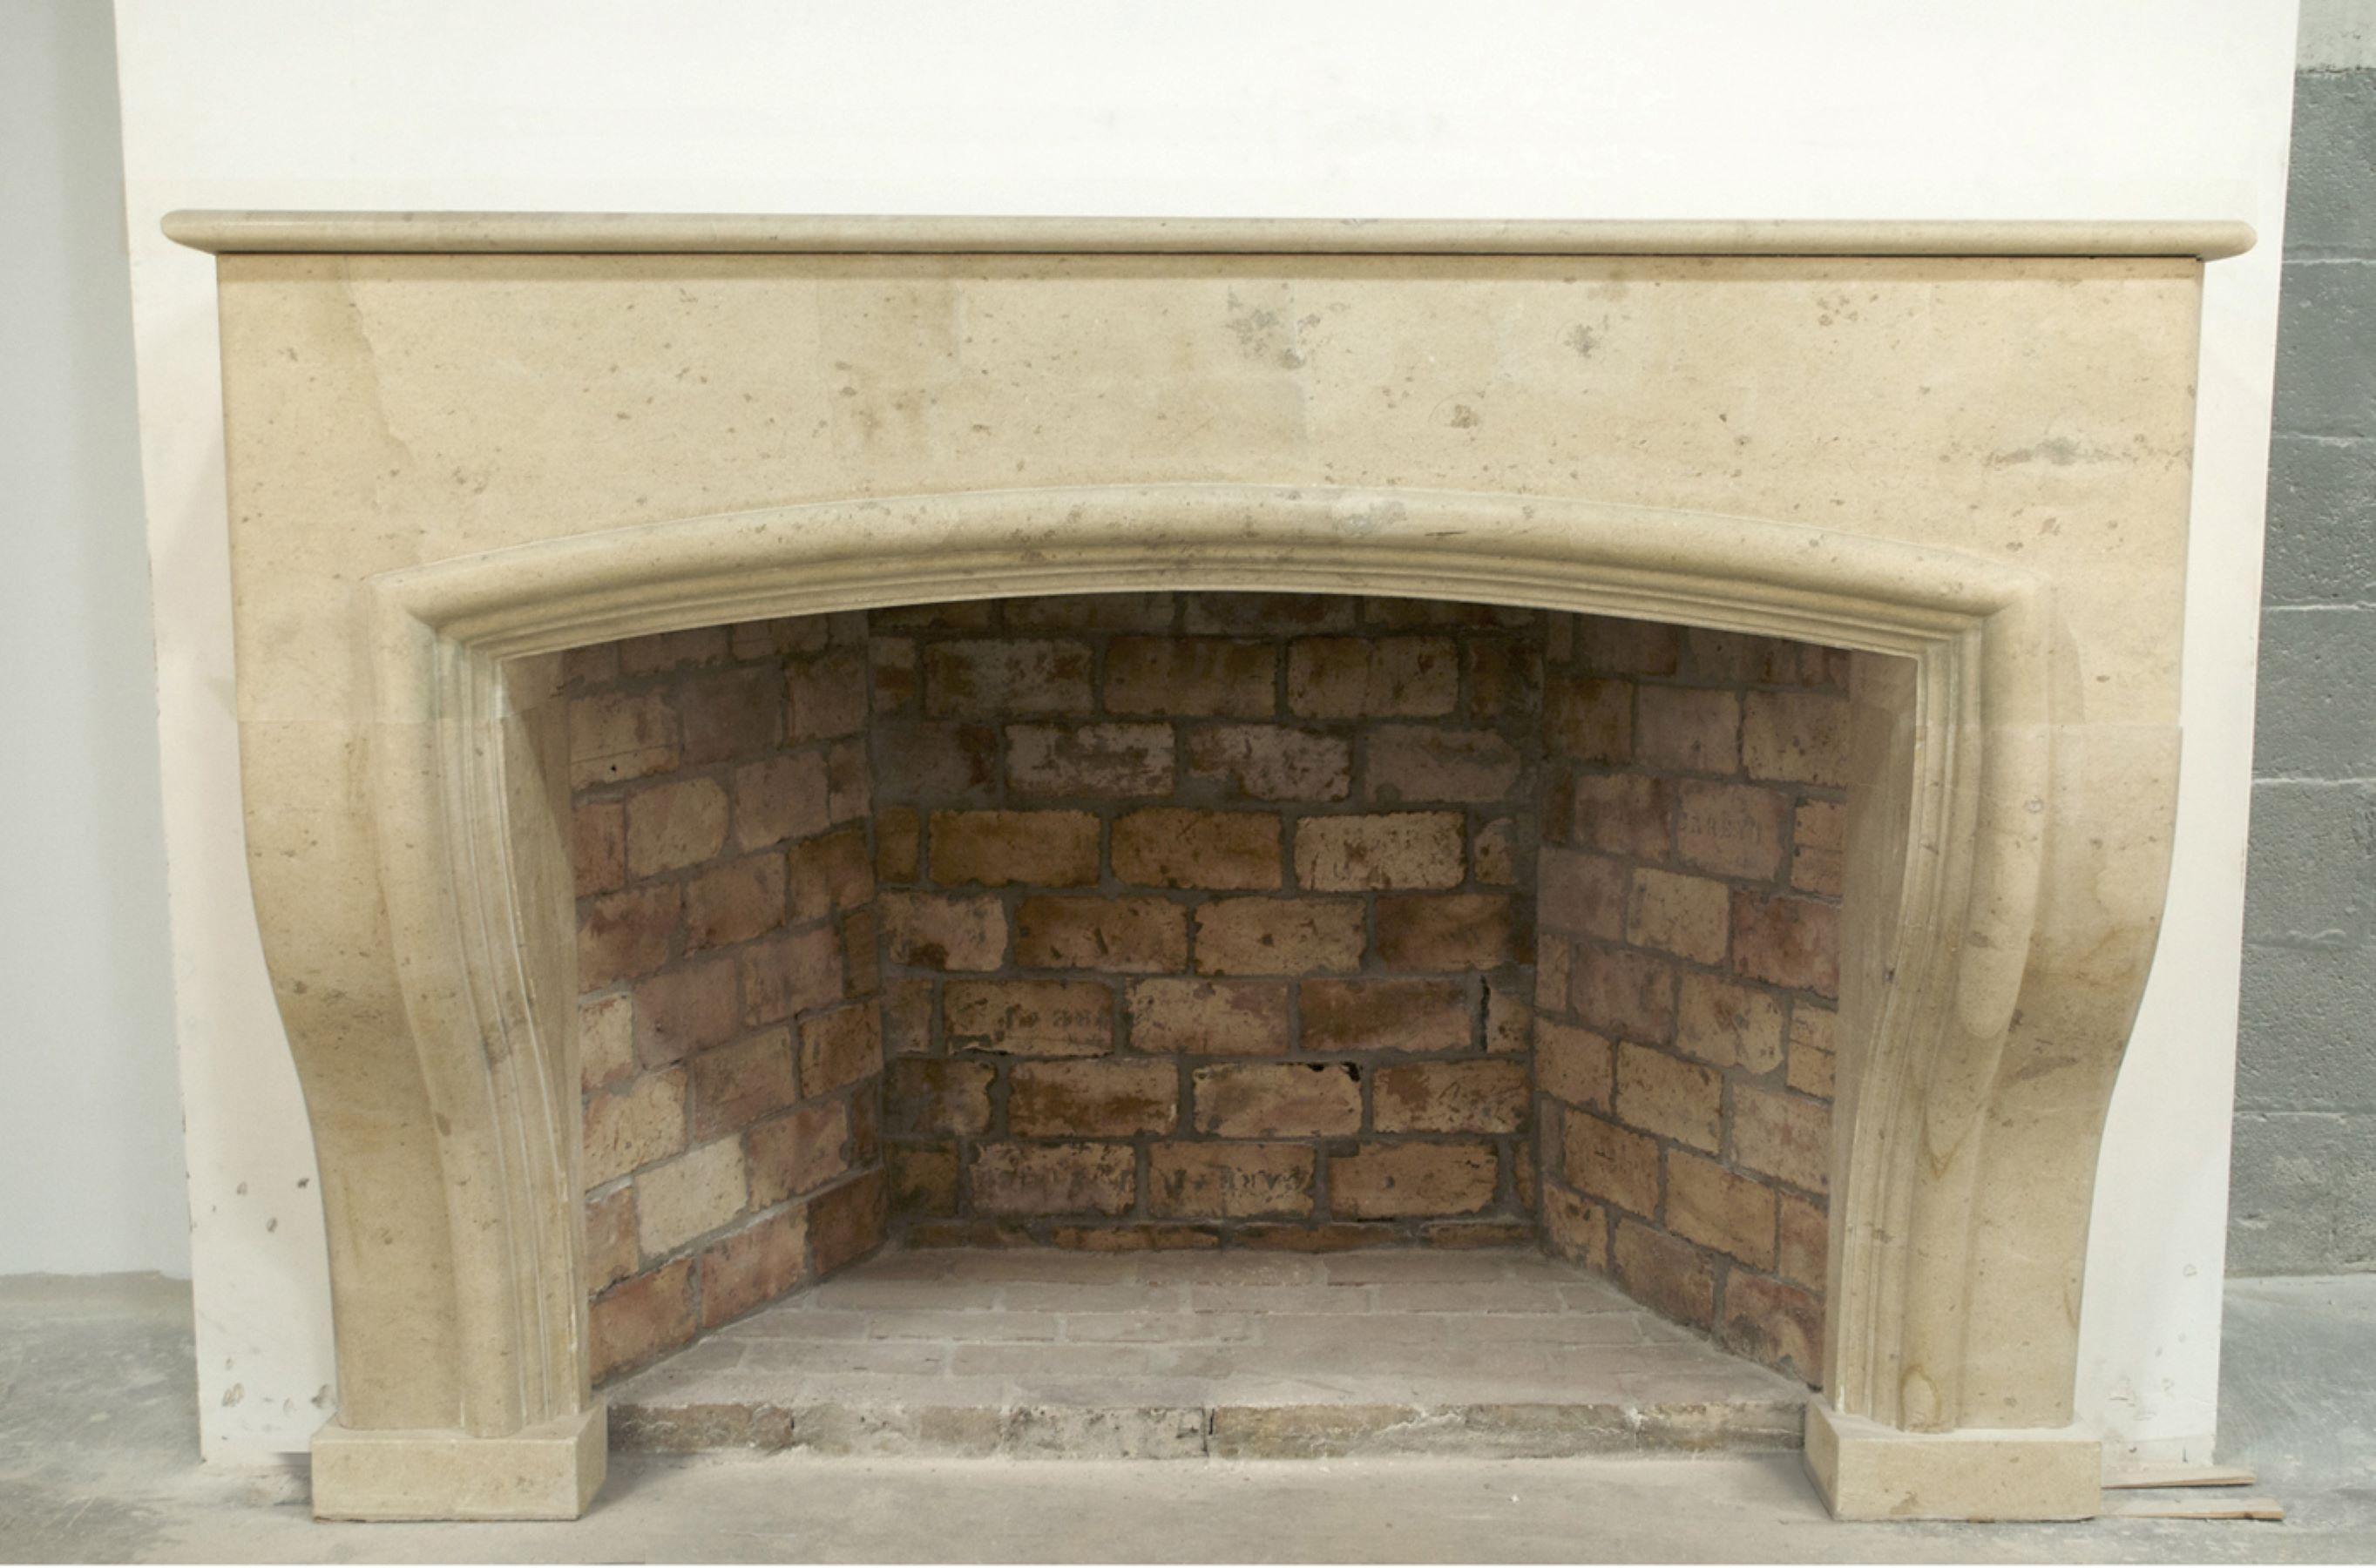 The Bourgogne fireplace evokes the classic French Provincial style. It starts deep at almost 13